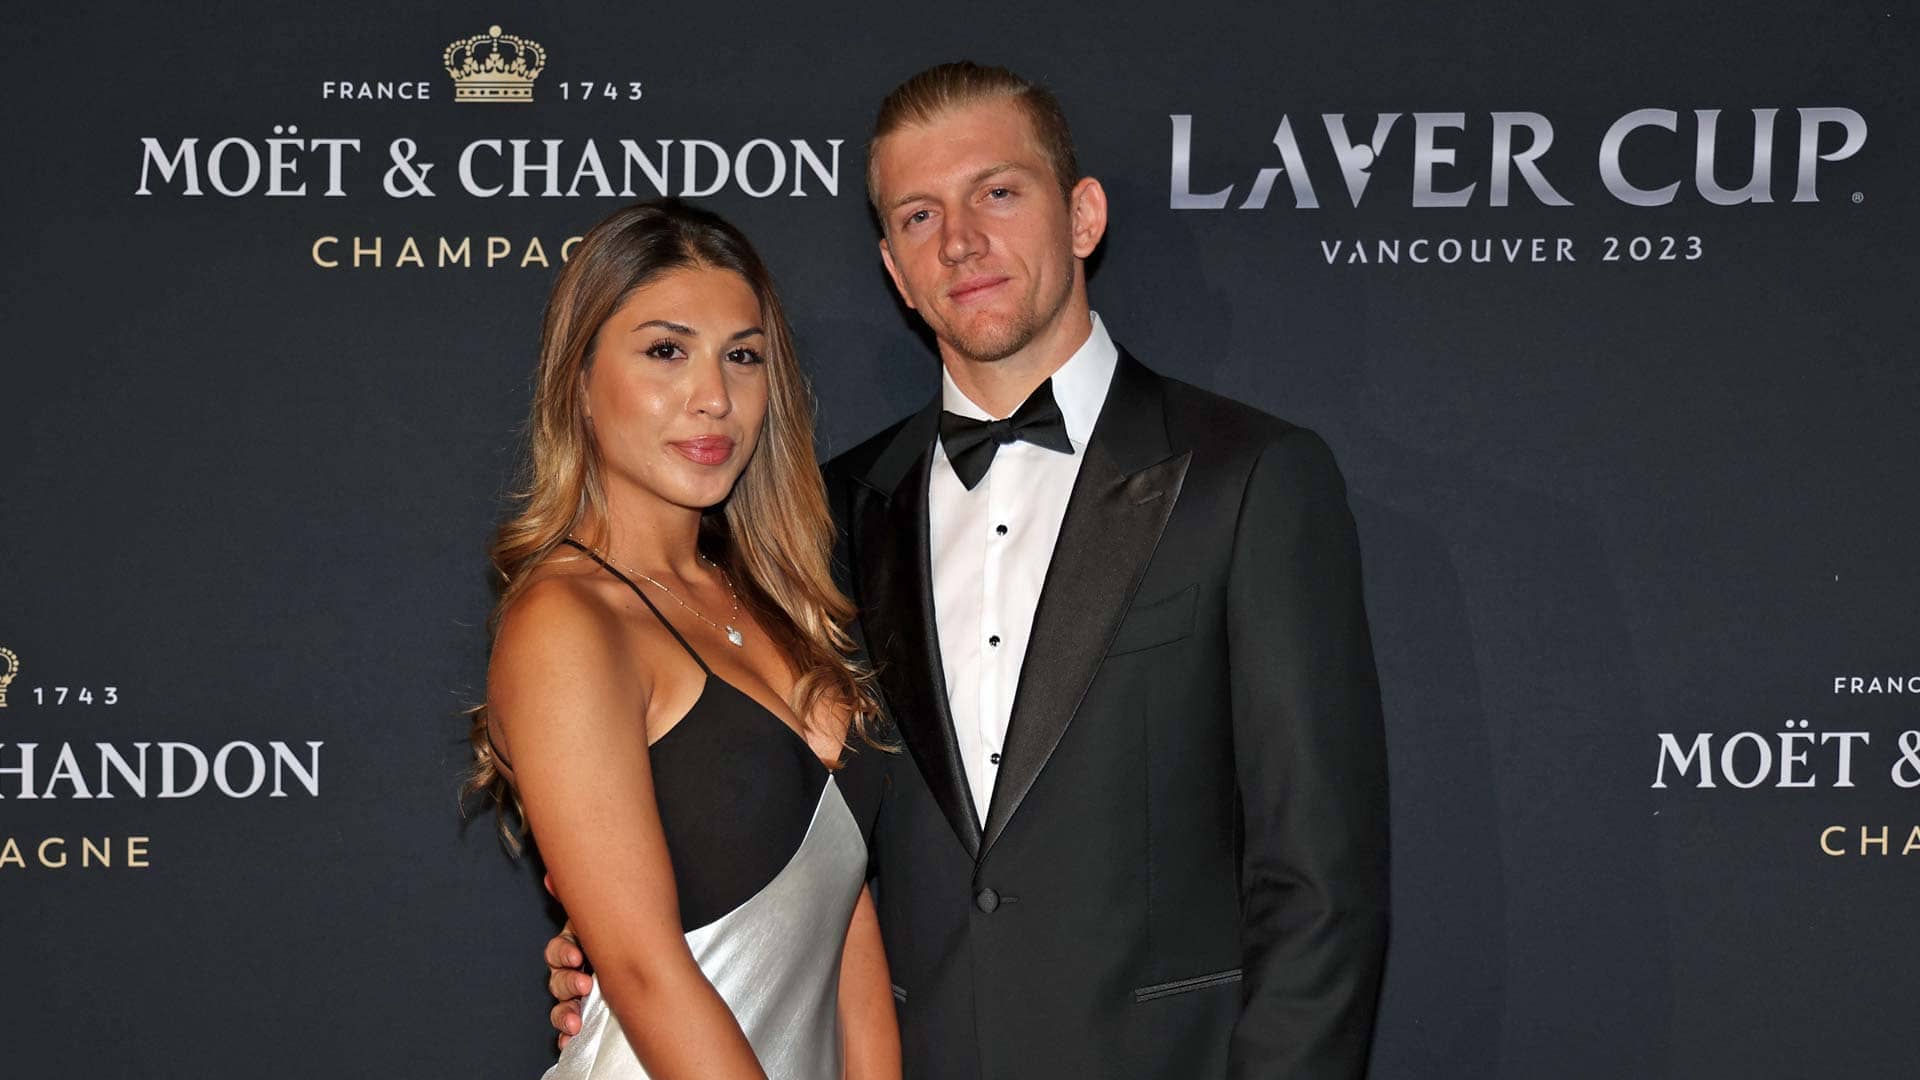 Paloma Amatiste and Alejandro Davidovich Fokina dressed to impressed at the 2023 Laver Cup.